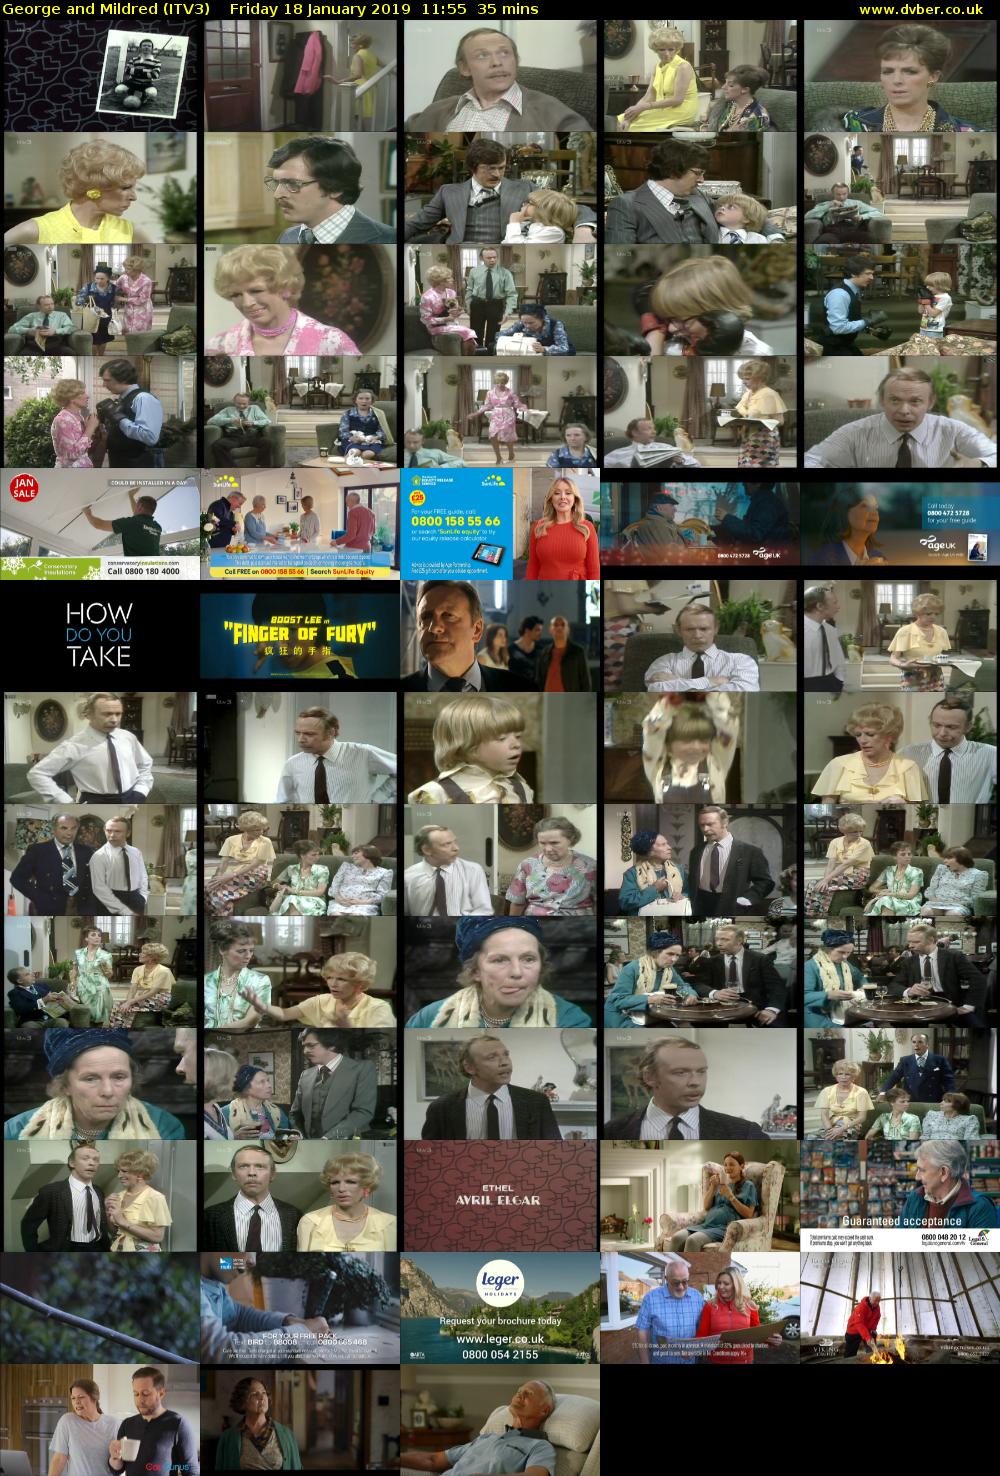 George and Mildred (ITV3) Friday 18 January 2019 11:55 - 12:30